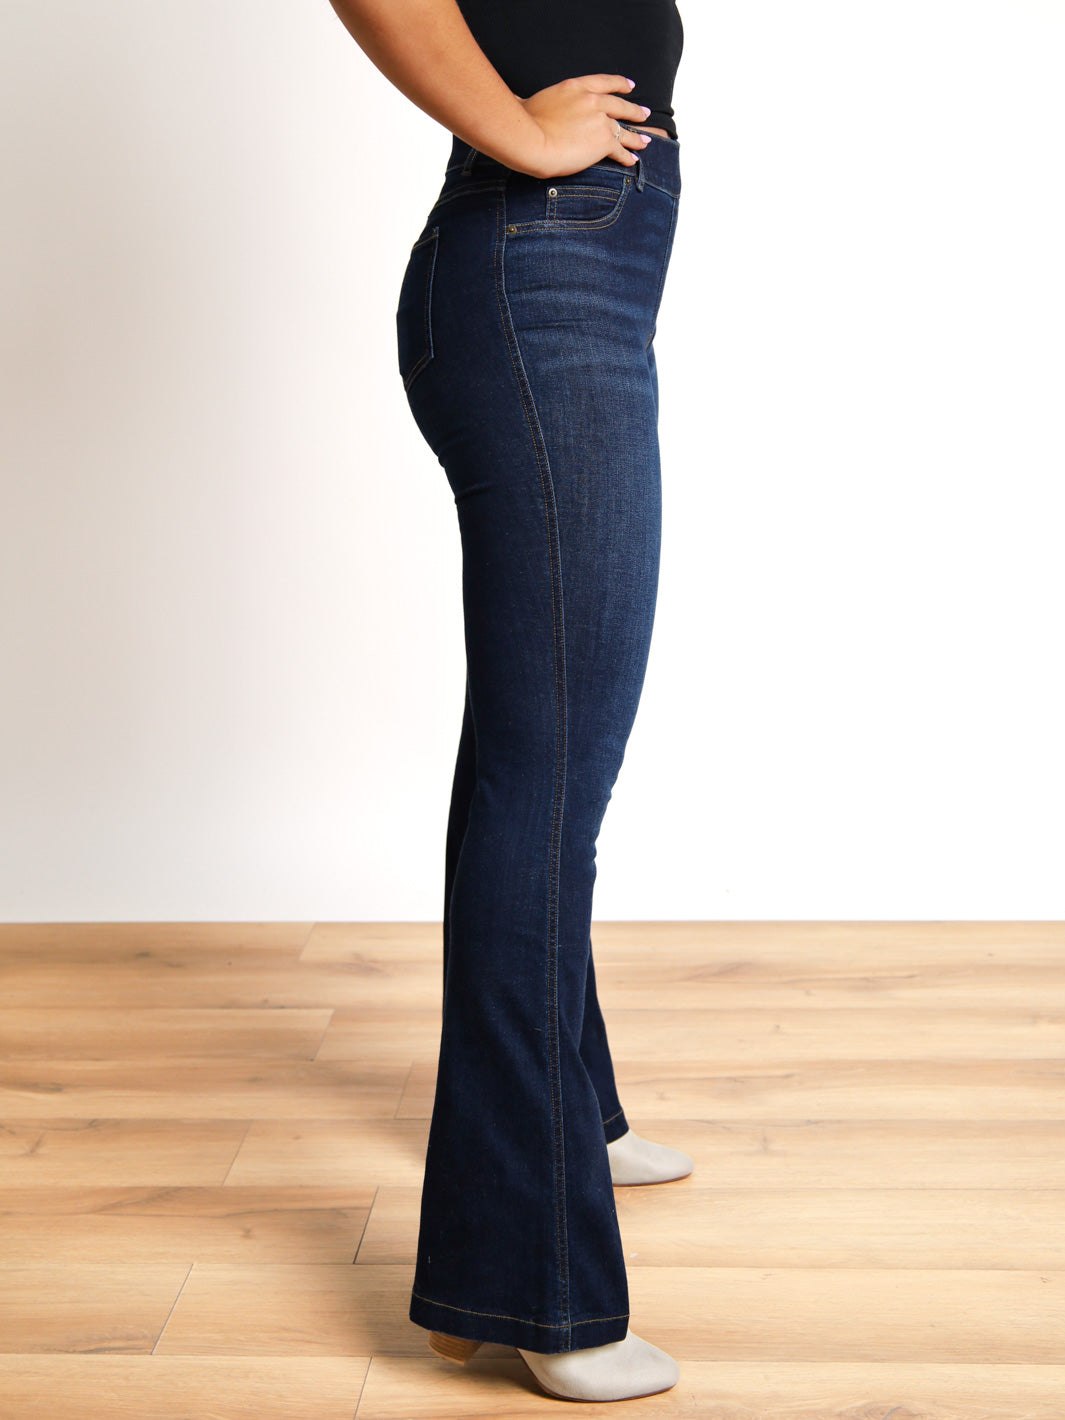 Women's High-Rise Flare Jeans, Midnight Shade SPANX, 57% OFF